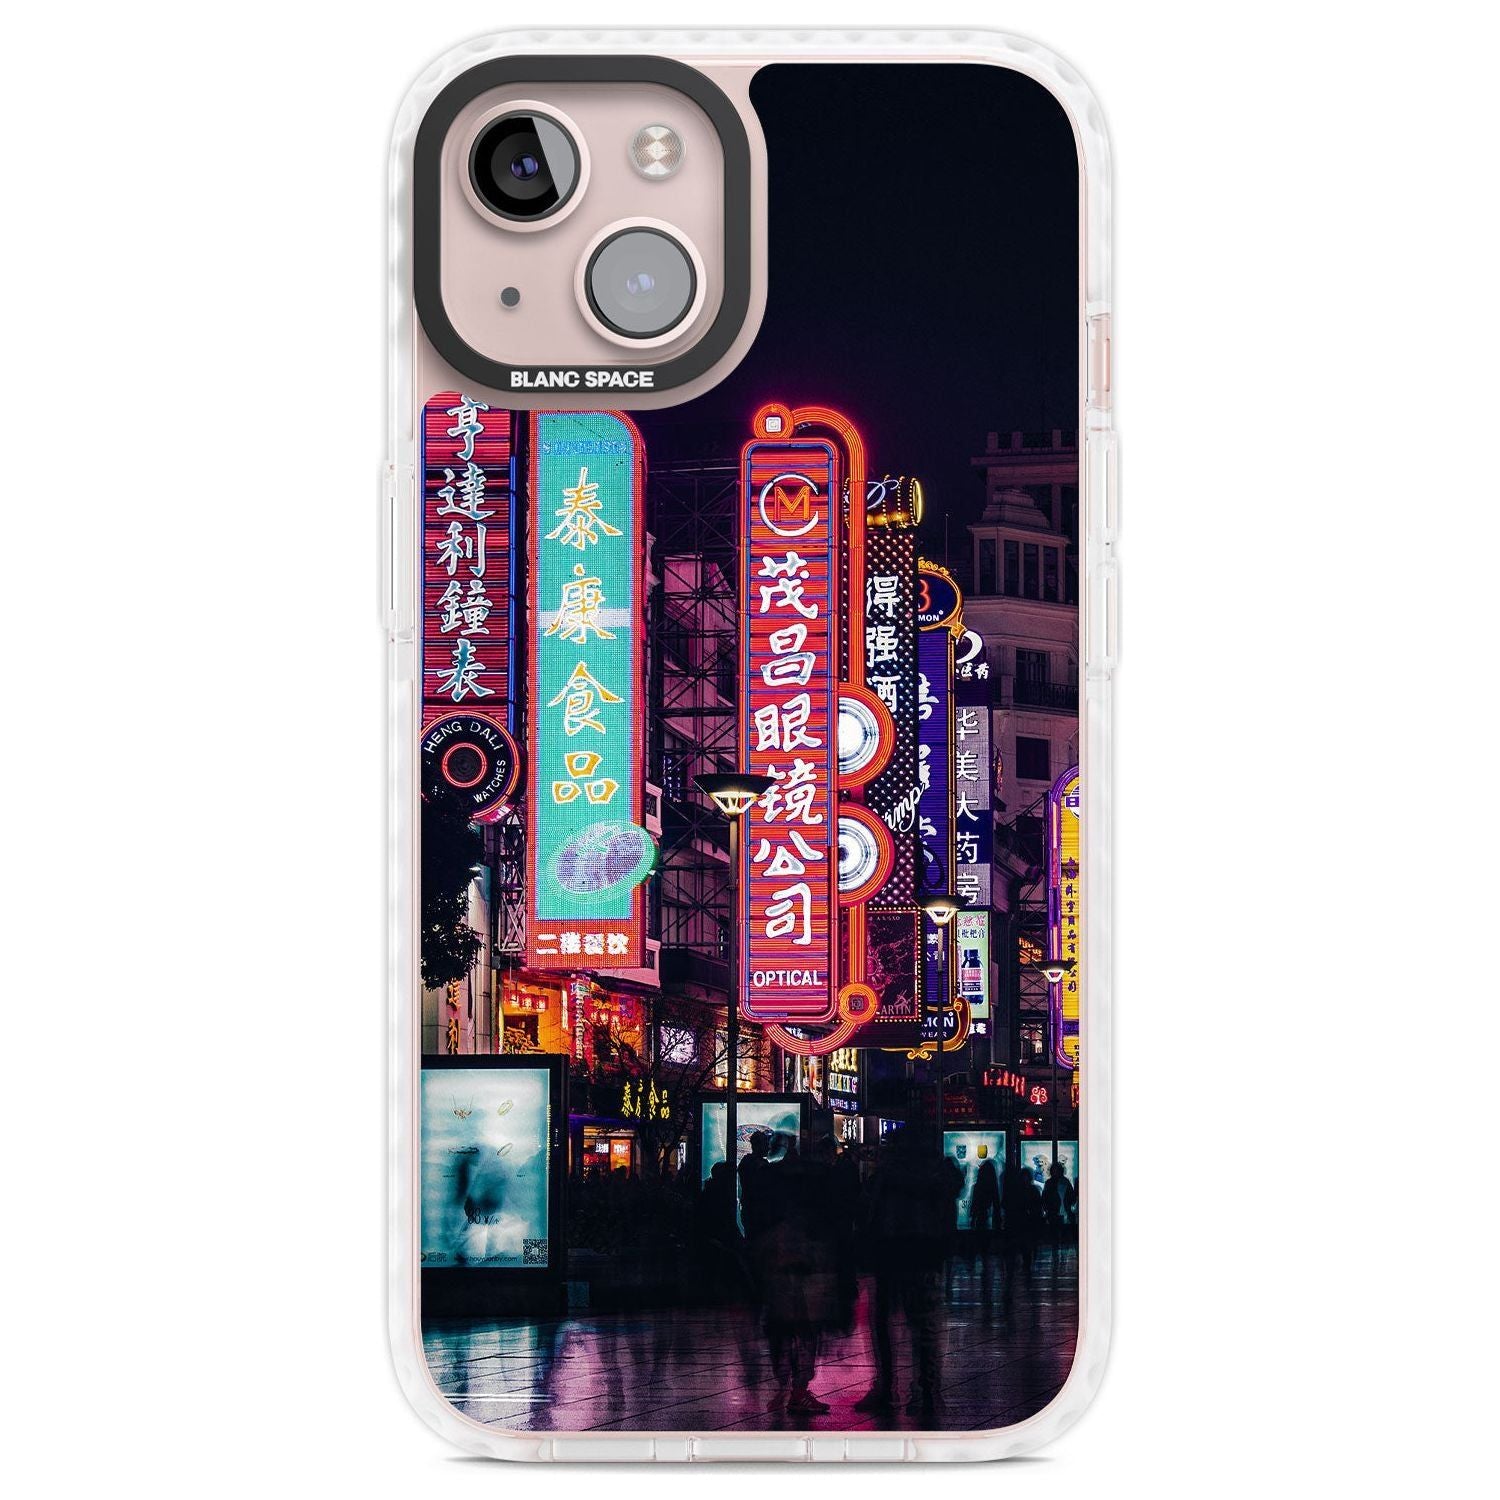 Busy Street - Neon Cities Photographs Phone Case iPhone 13 / Impact Case,iPhone 14 / Impact Case,iPhone 15 Plus / Impact Case,iPhone 15 / Impact Case Blanc Space